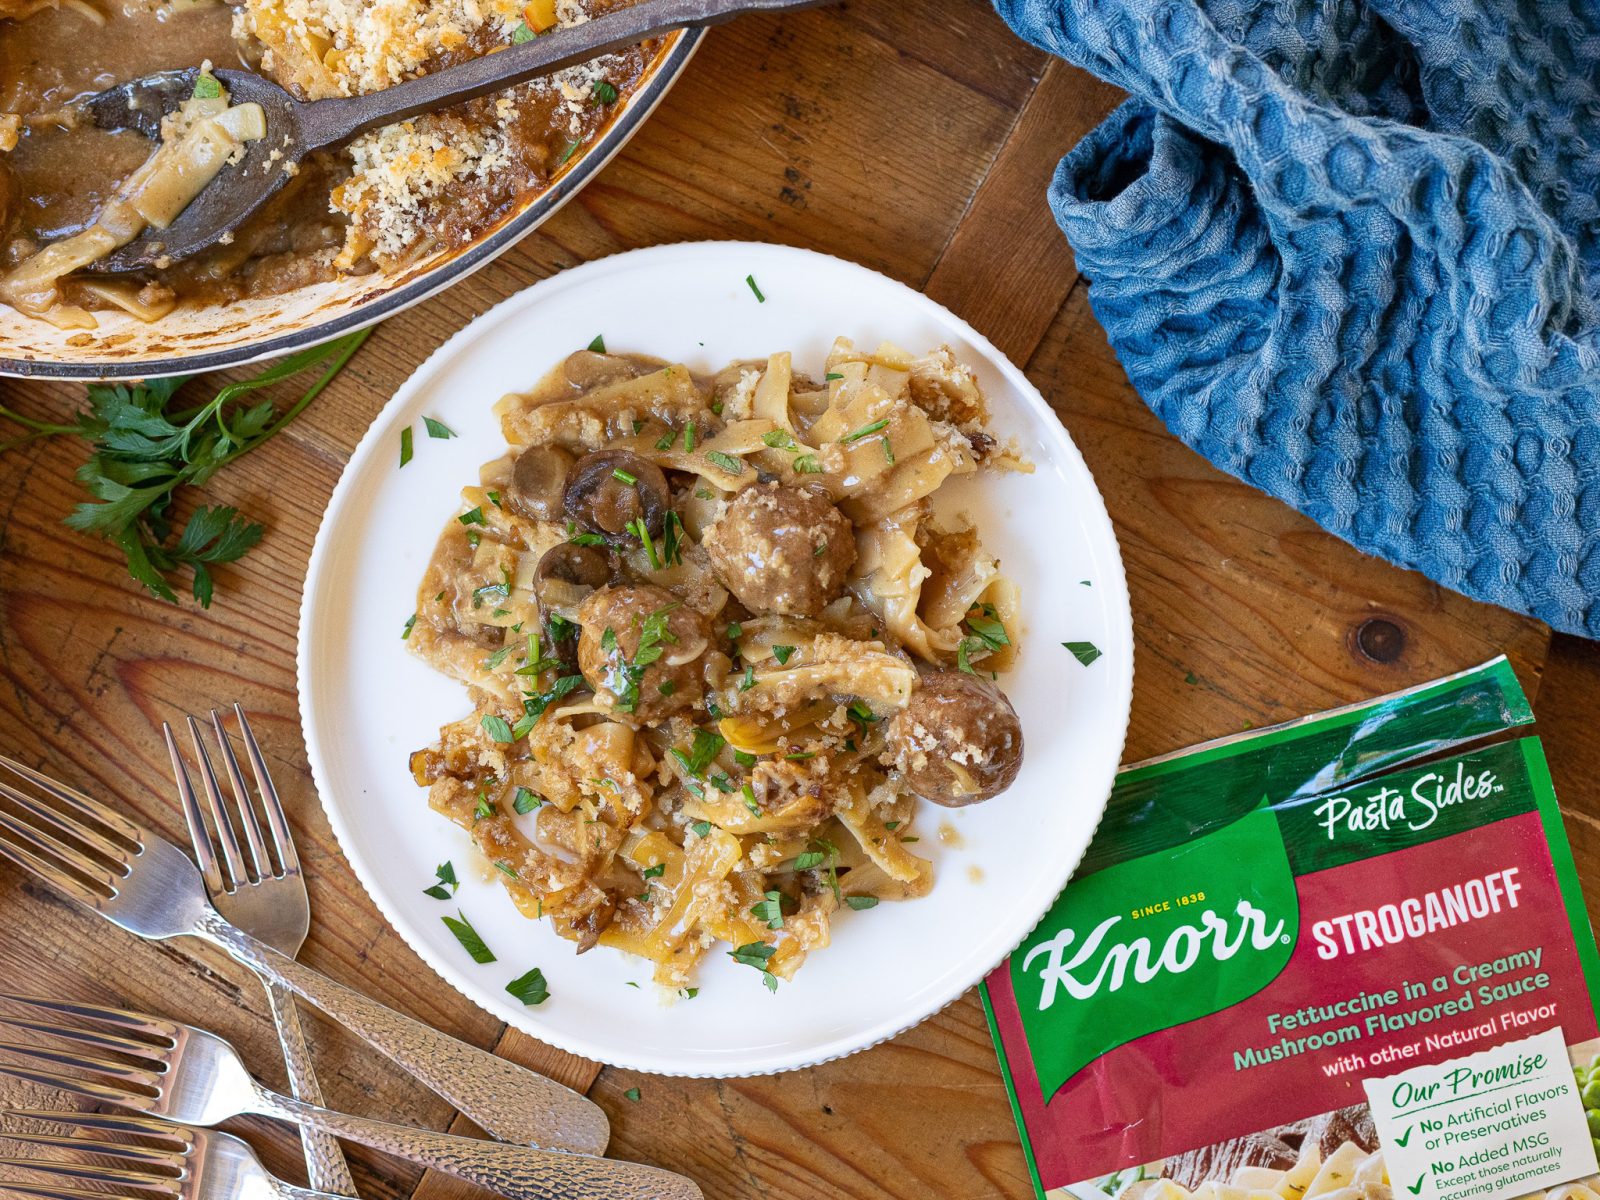 Stock Up On Tasty Knorr Sides And Have Easy Meals For The Busy Holiday Season!